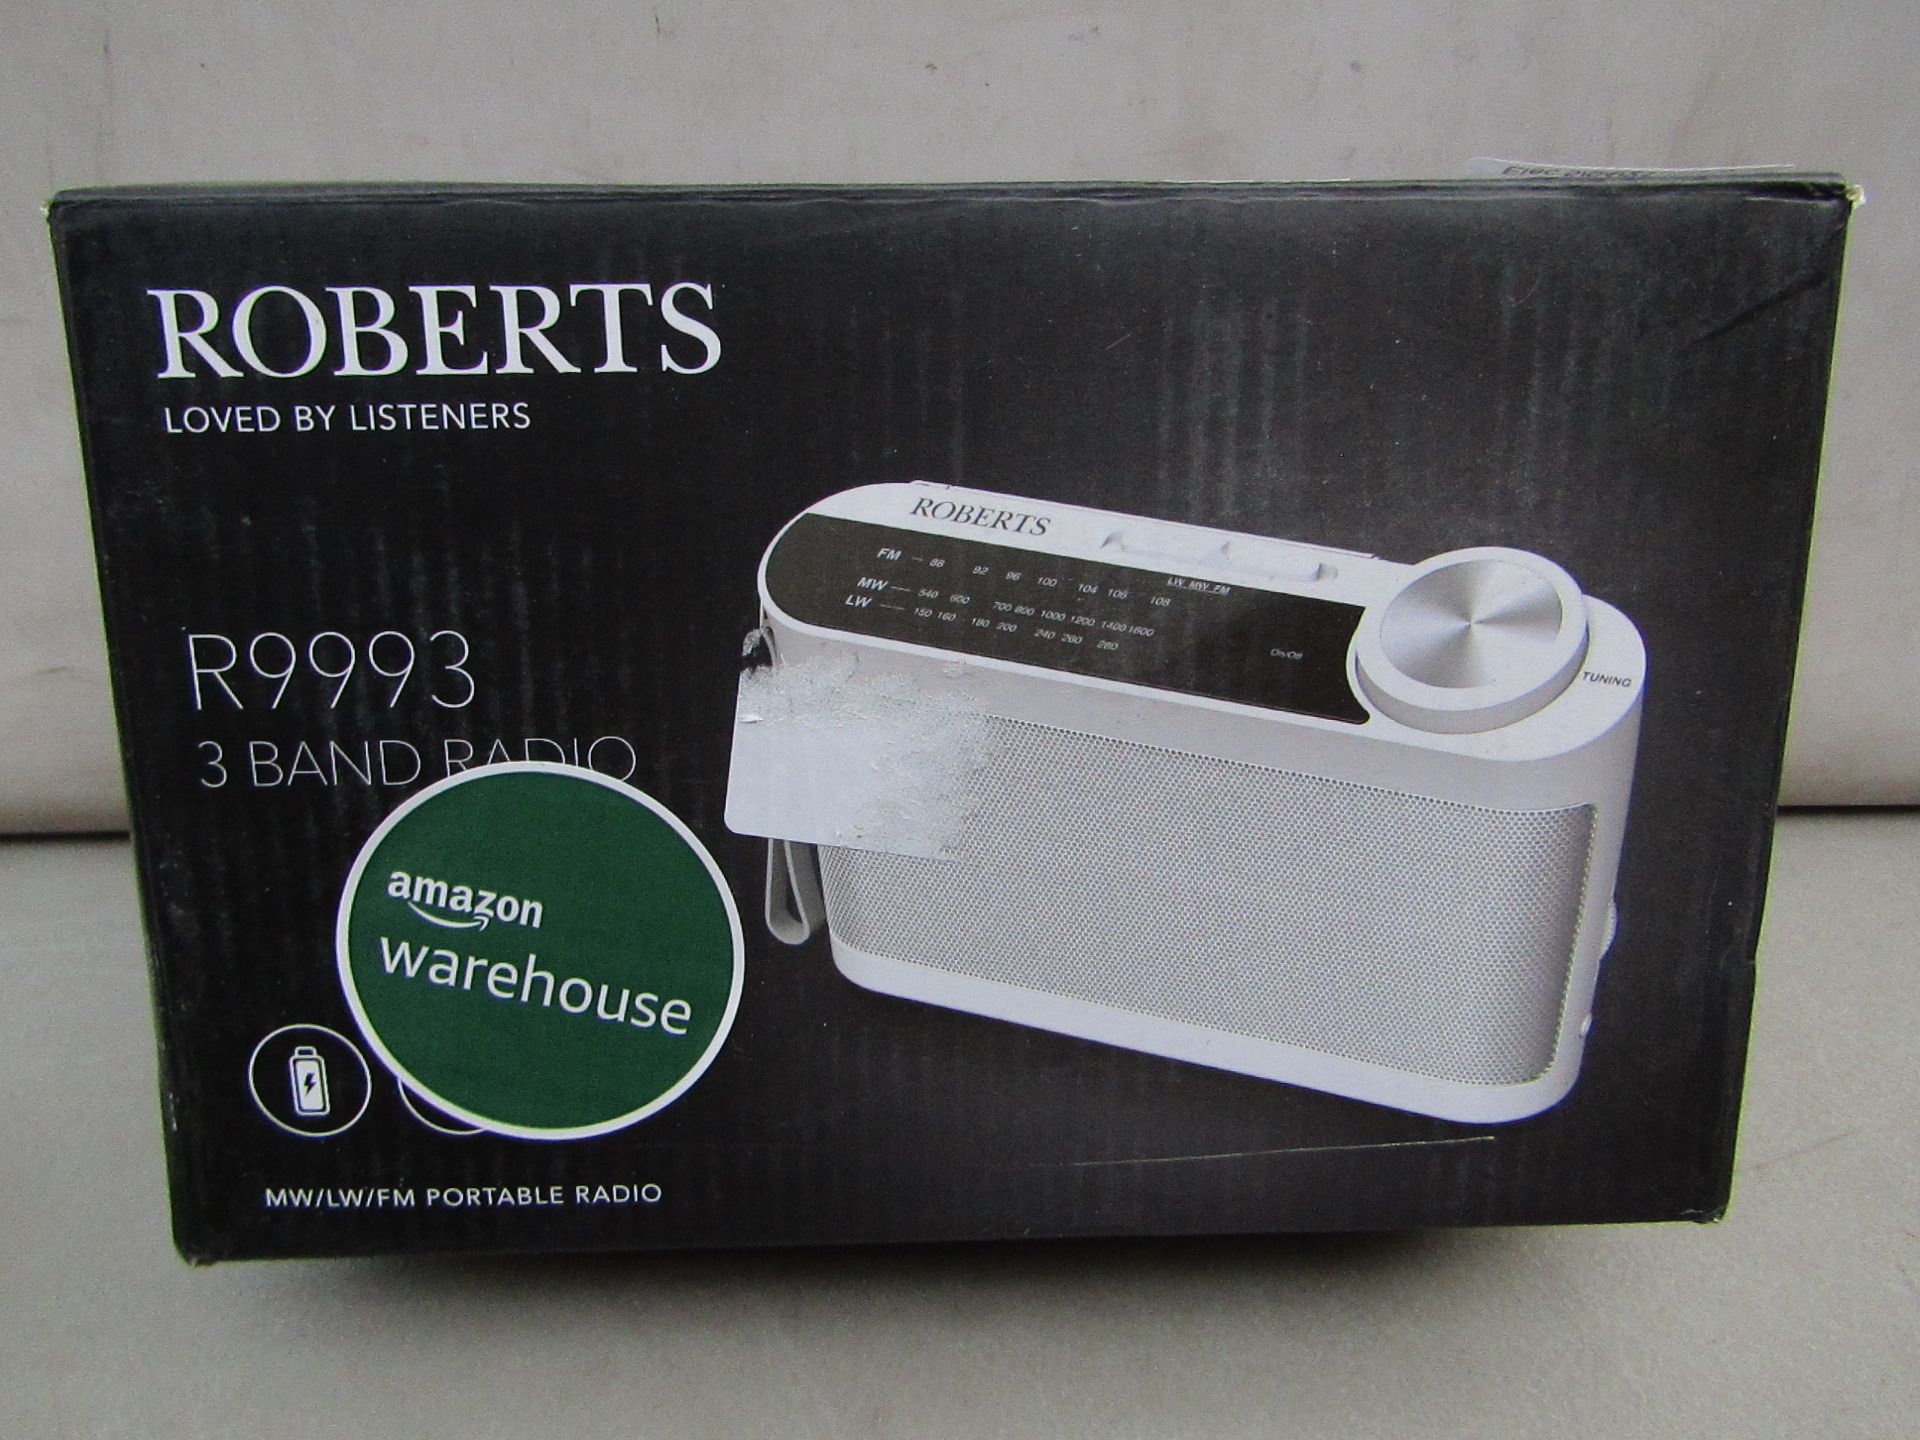 Roberts Loved By Listeners R9993 3 Band Radio Unchecked & Boxed